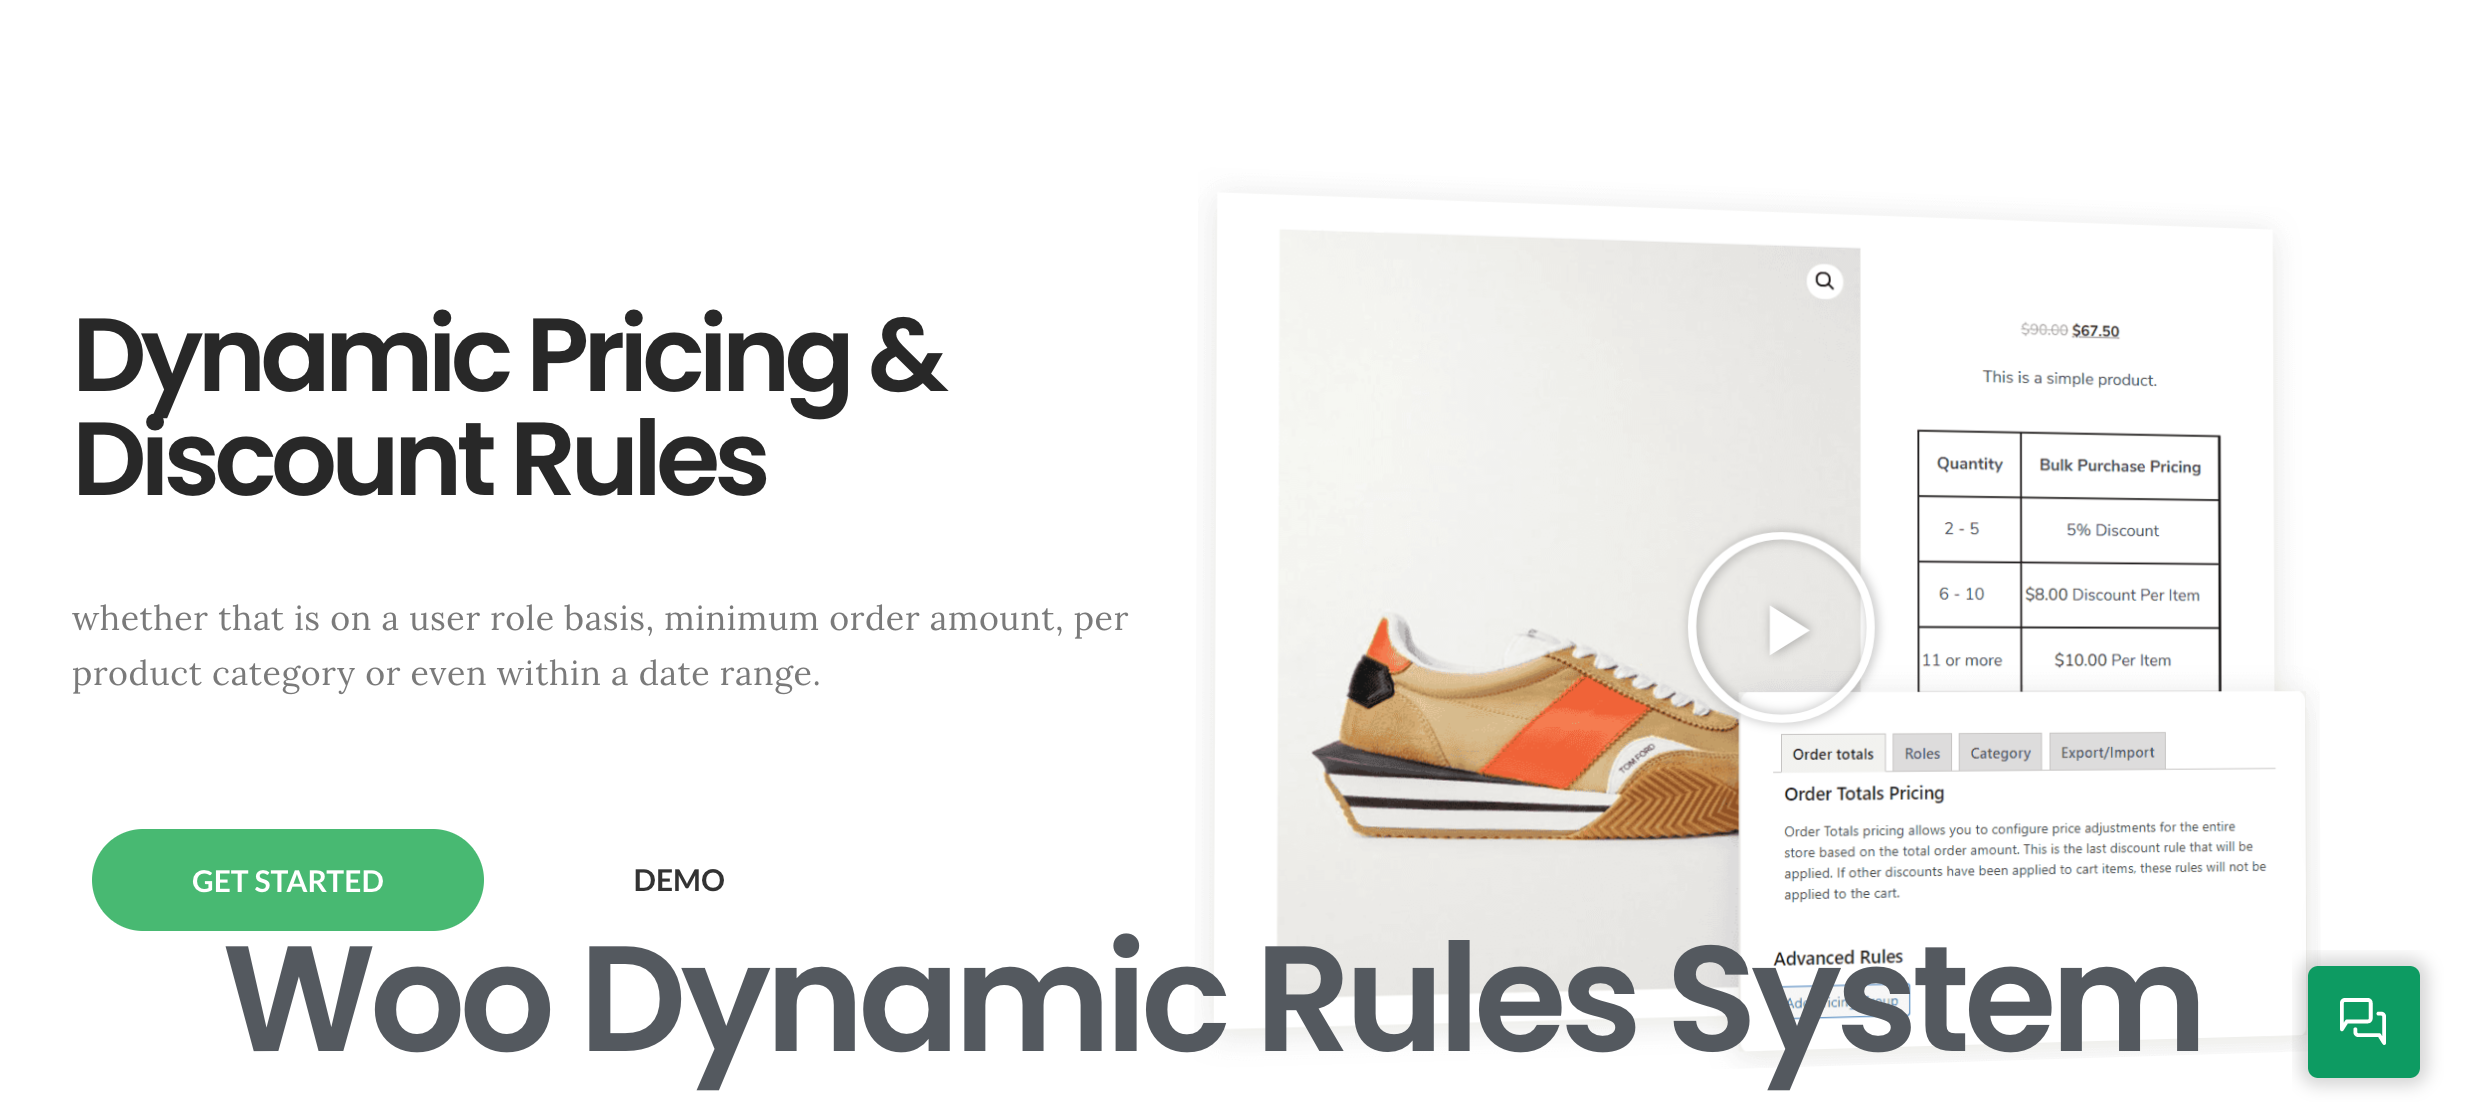 WooCommerce Dynamic Pricing & Discounts Rules